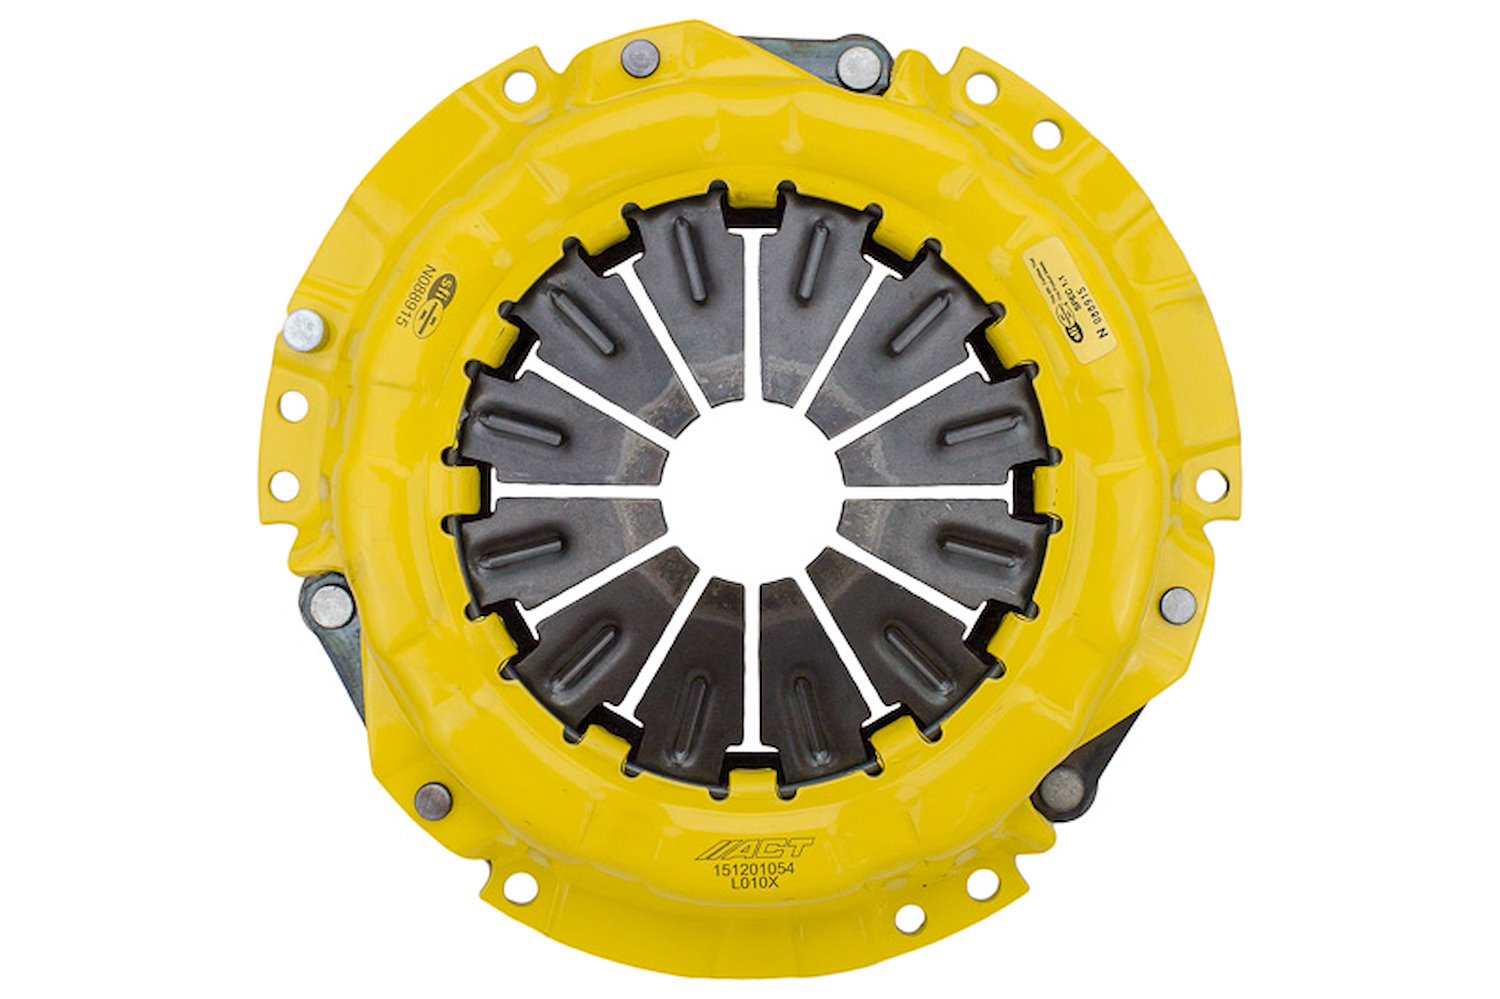 Xtreme Transmission Clutch Pressure Plate Fits Select Lotus